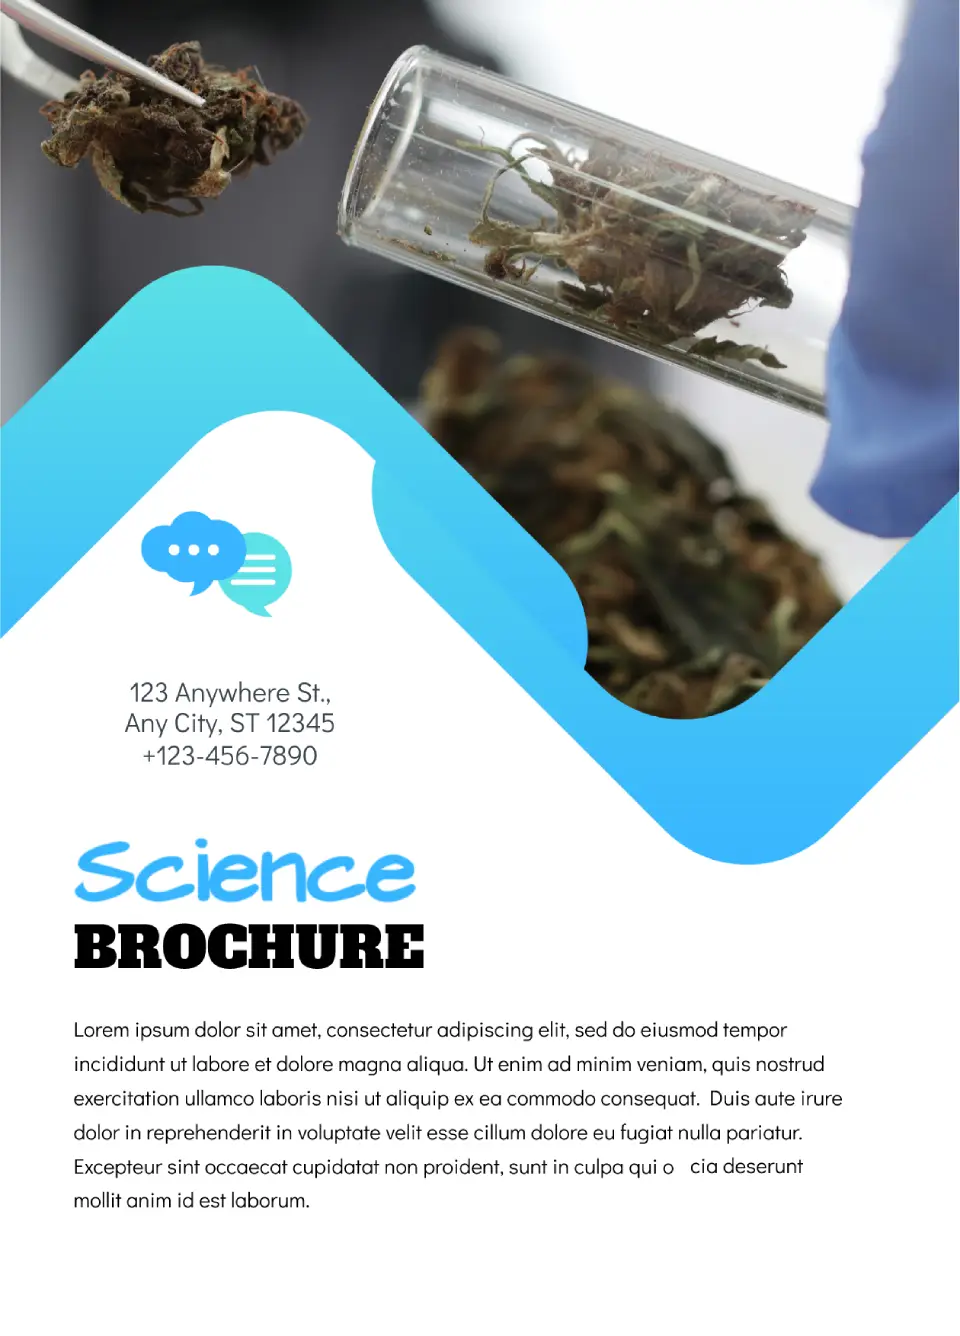 Science Brochure Template for Google Docs